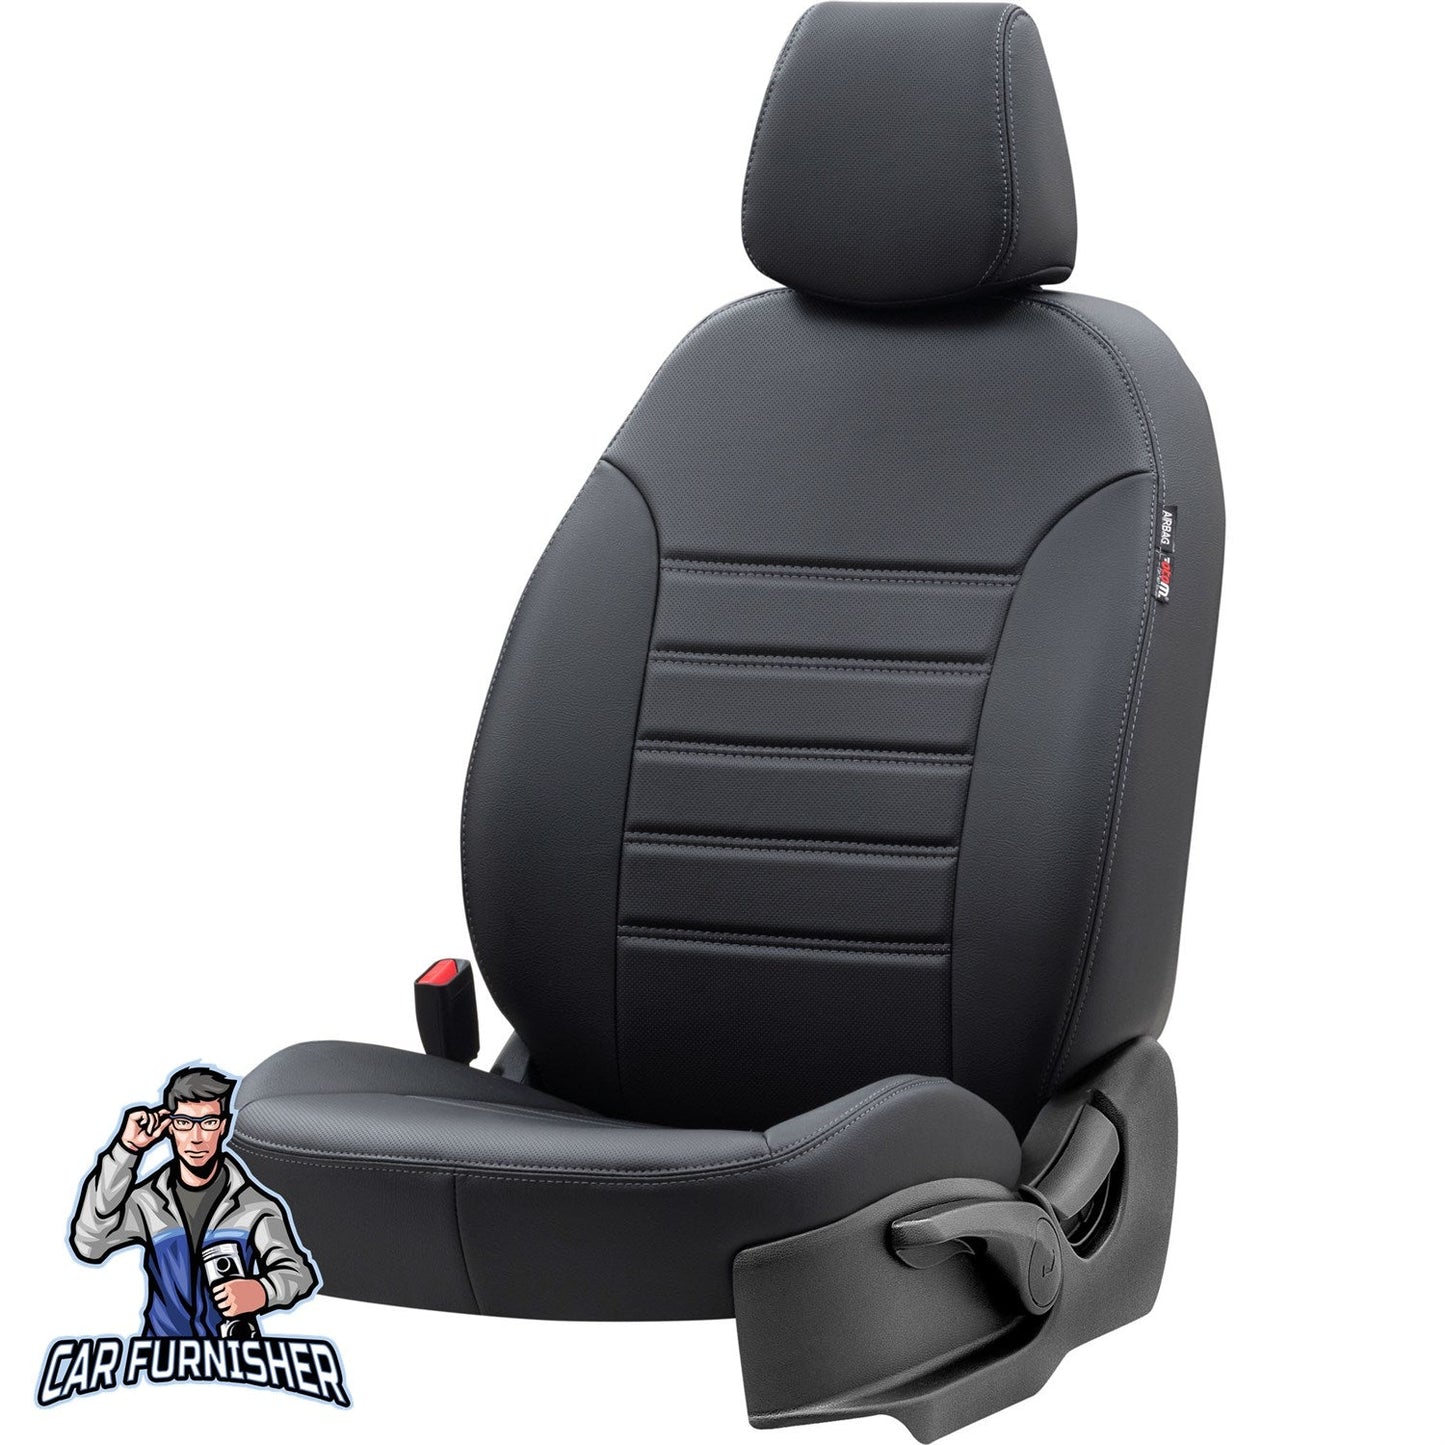 Mitsubishi Attrage Seat Covers Istanbul Leather Design Black Leather